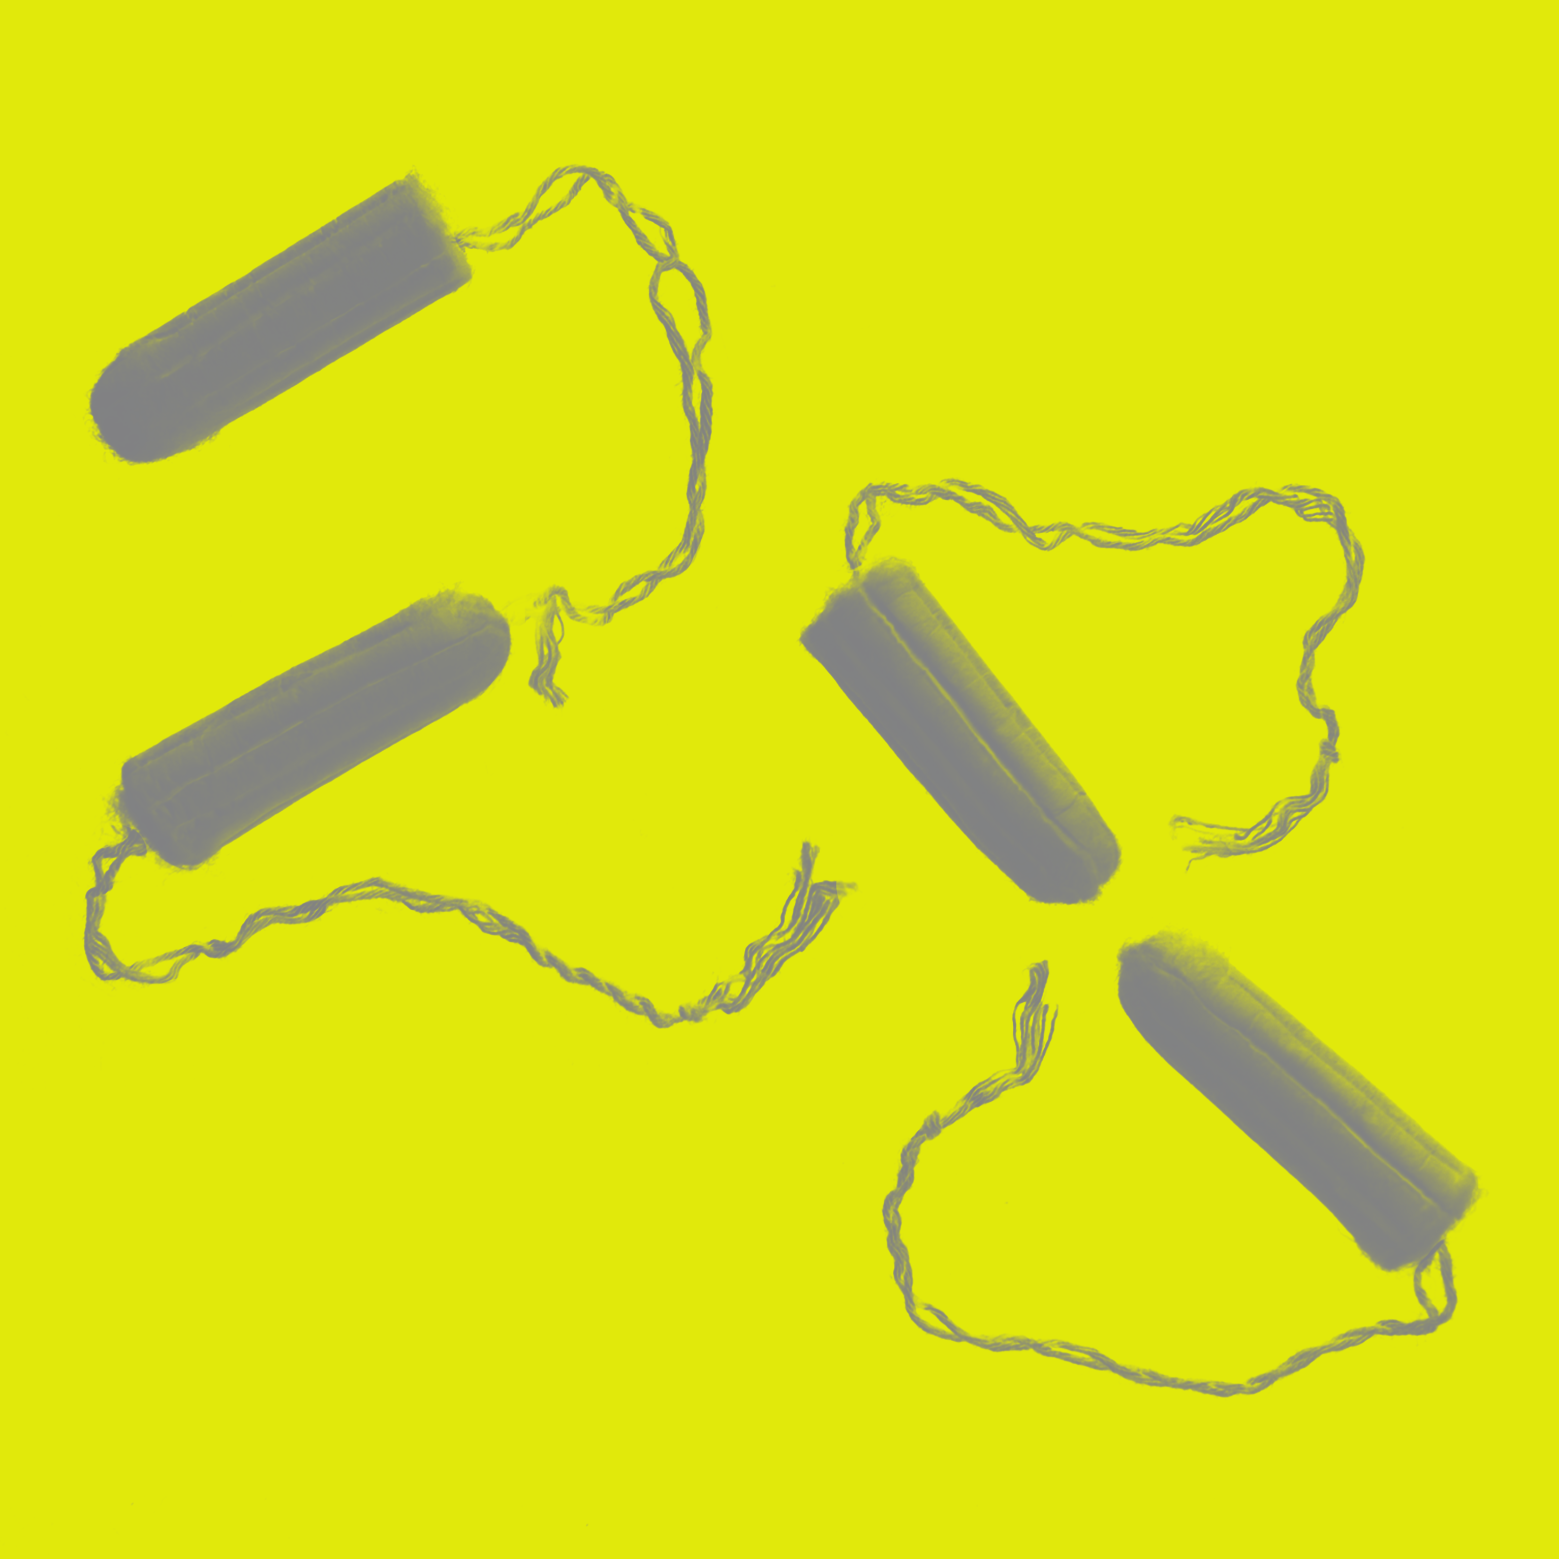 28th April - Period Pain four tampons on yellow background. O Street's submission for the Fedrigoni 365 publication